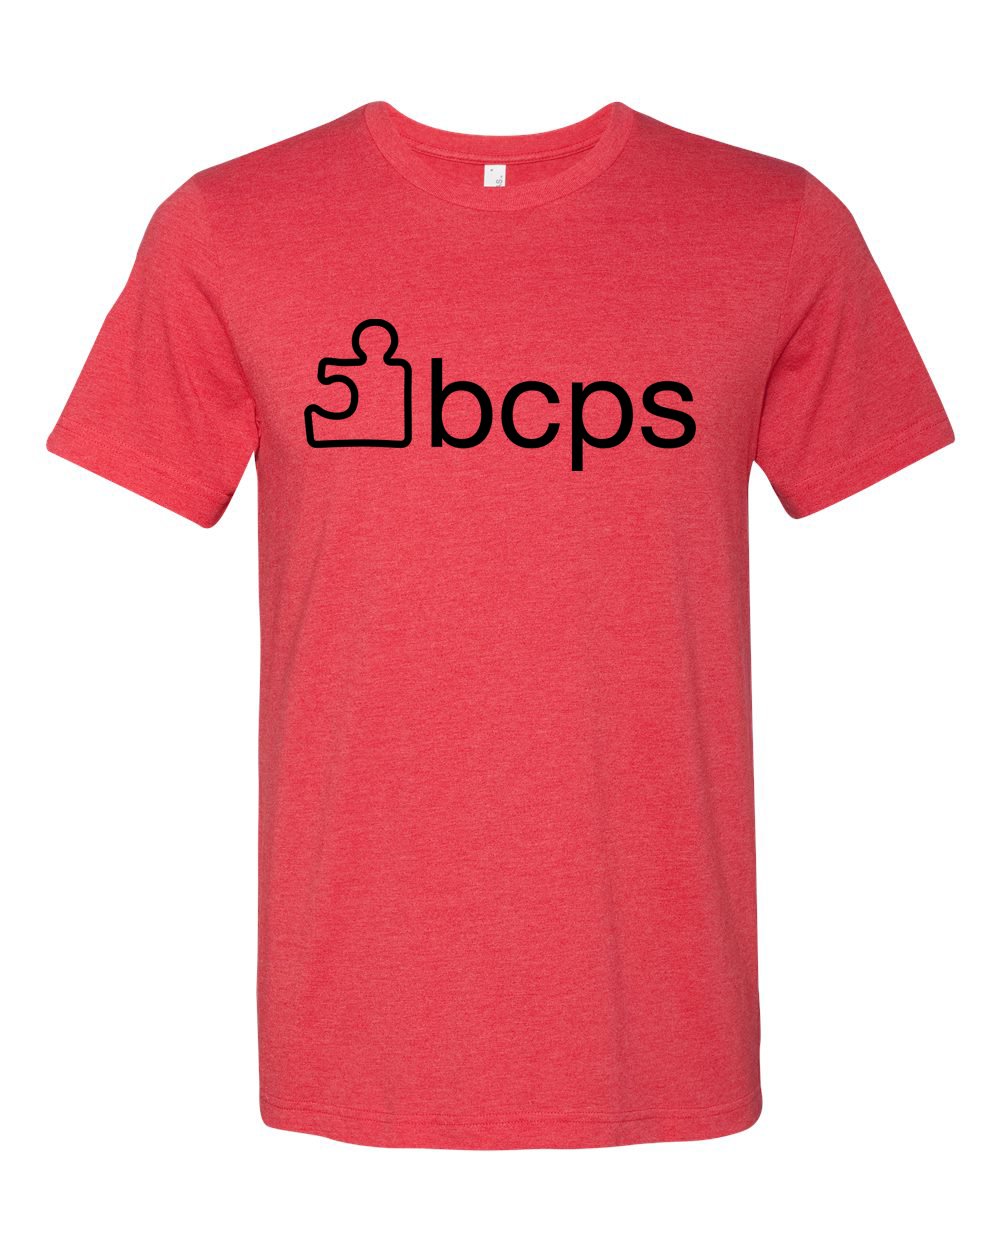 BCPS Short Sleeve - Heather Red